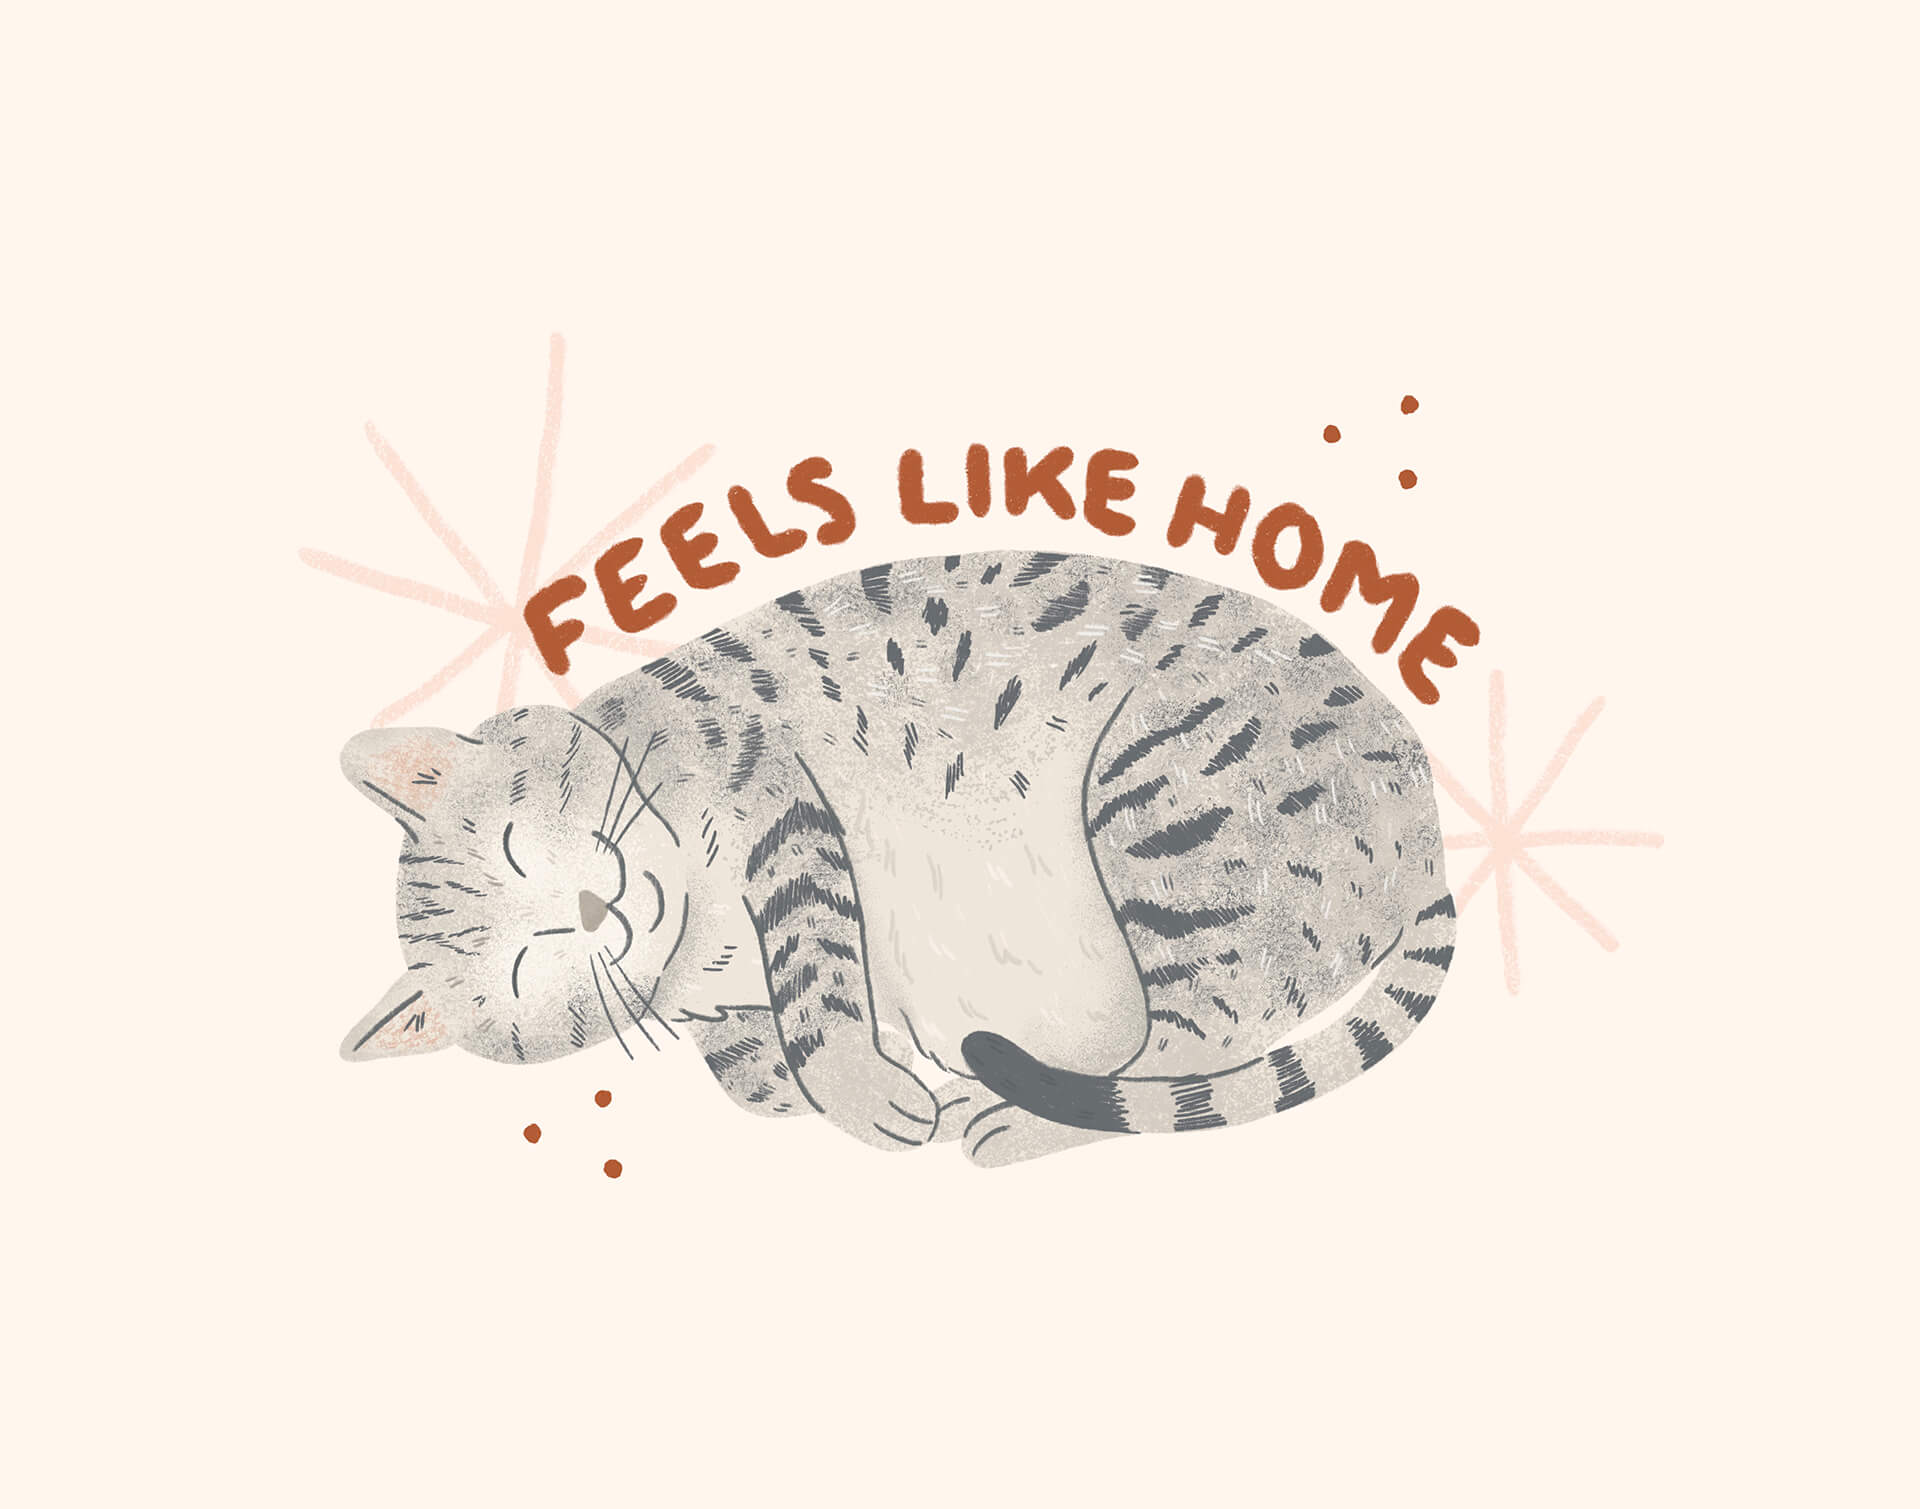 an illustration of a cat smiling in her sleep